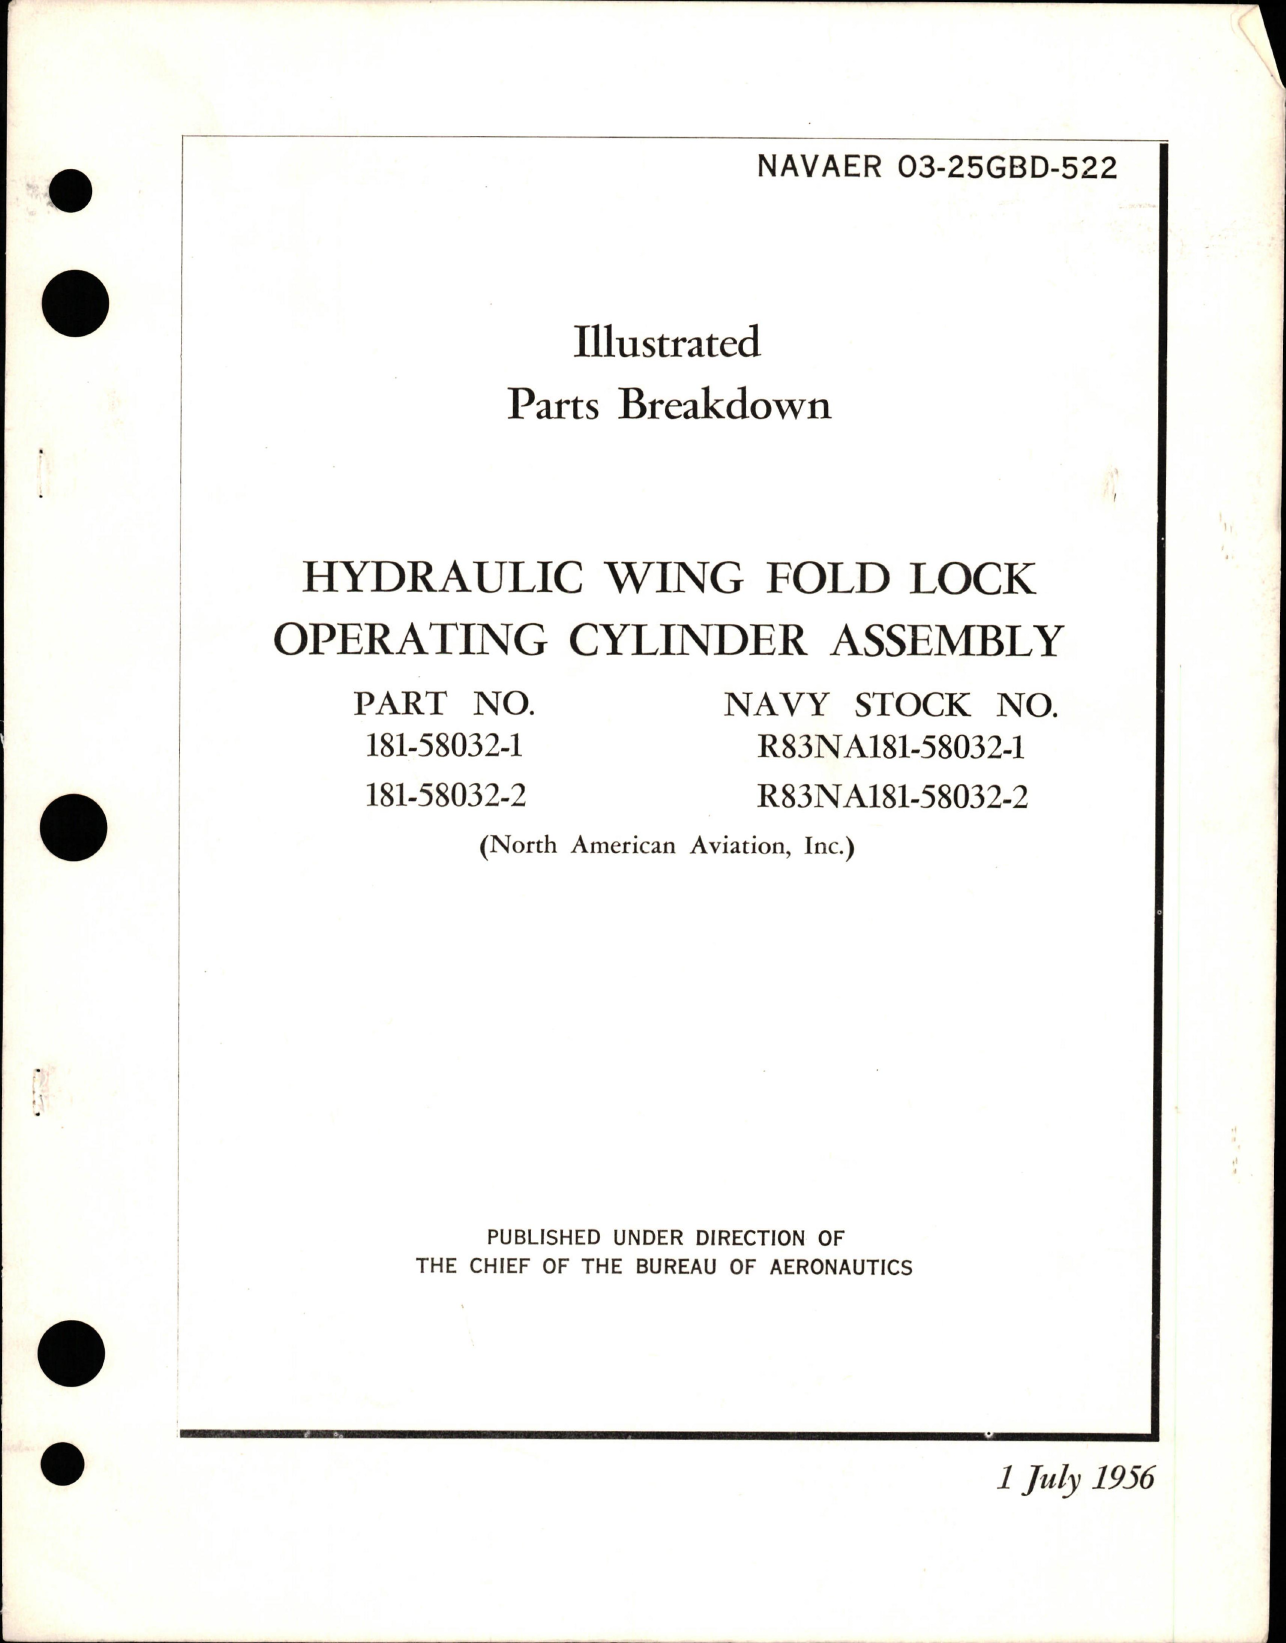 Sample page 1 from AirCorps Library document: Illustrated Parts Breakdown for Hydraulic Wing Fold Lock Operating Cylinder Assembly - Part 181-58032-1 and 181-58032-2